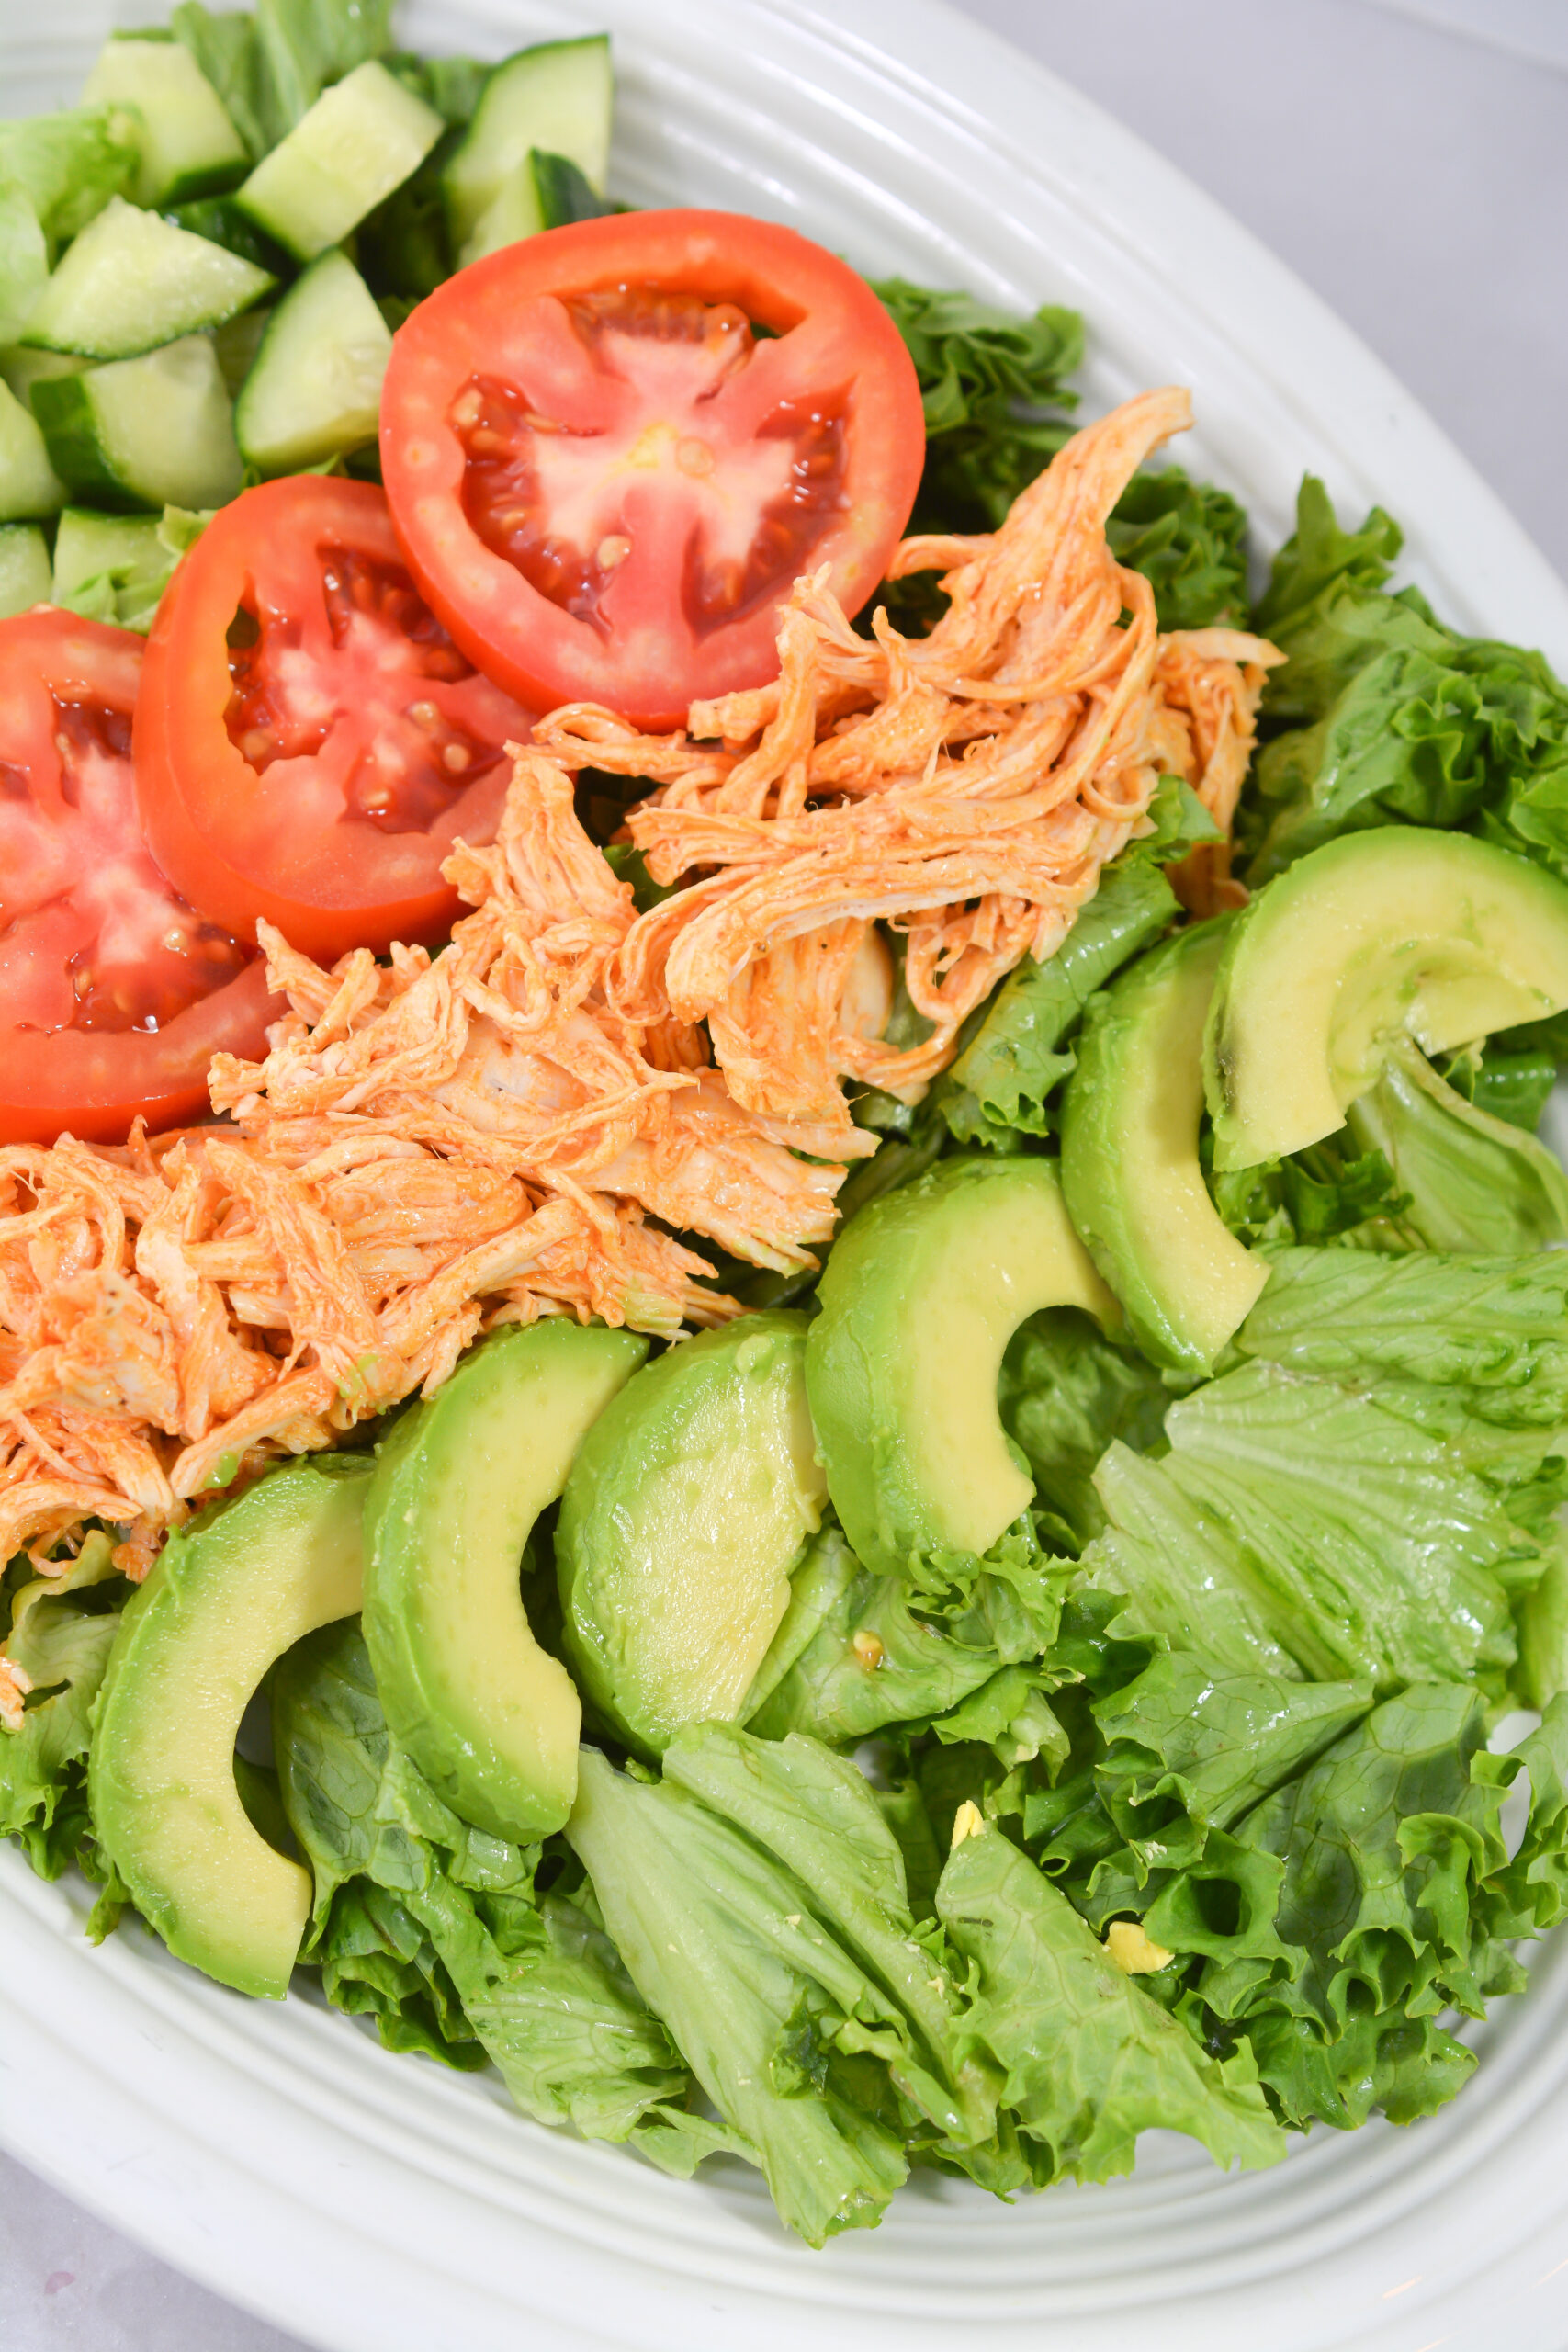 Buffalo Chicken Cobb Salad without dressing on a white plate.